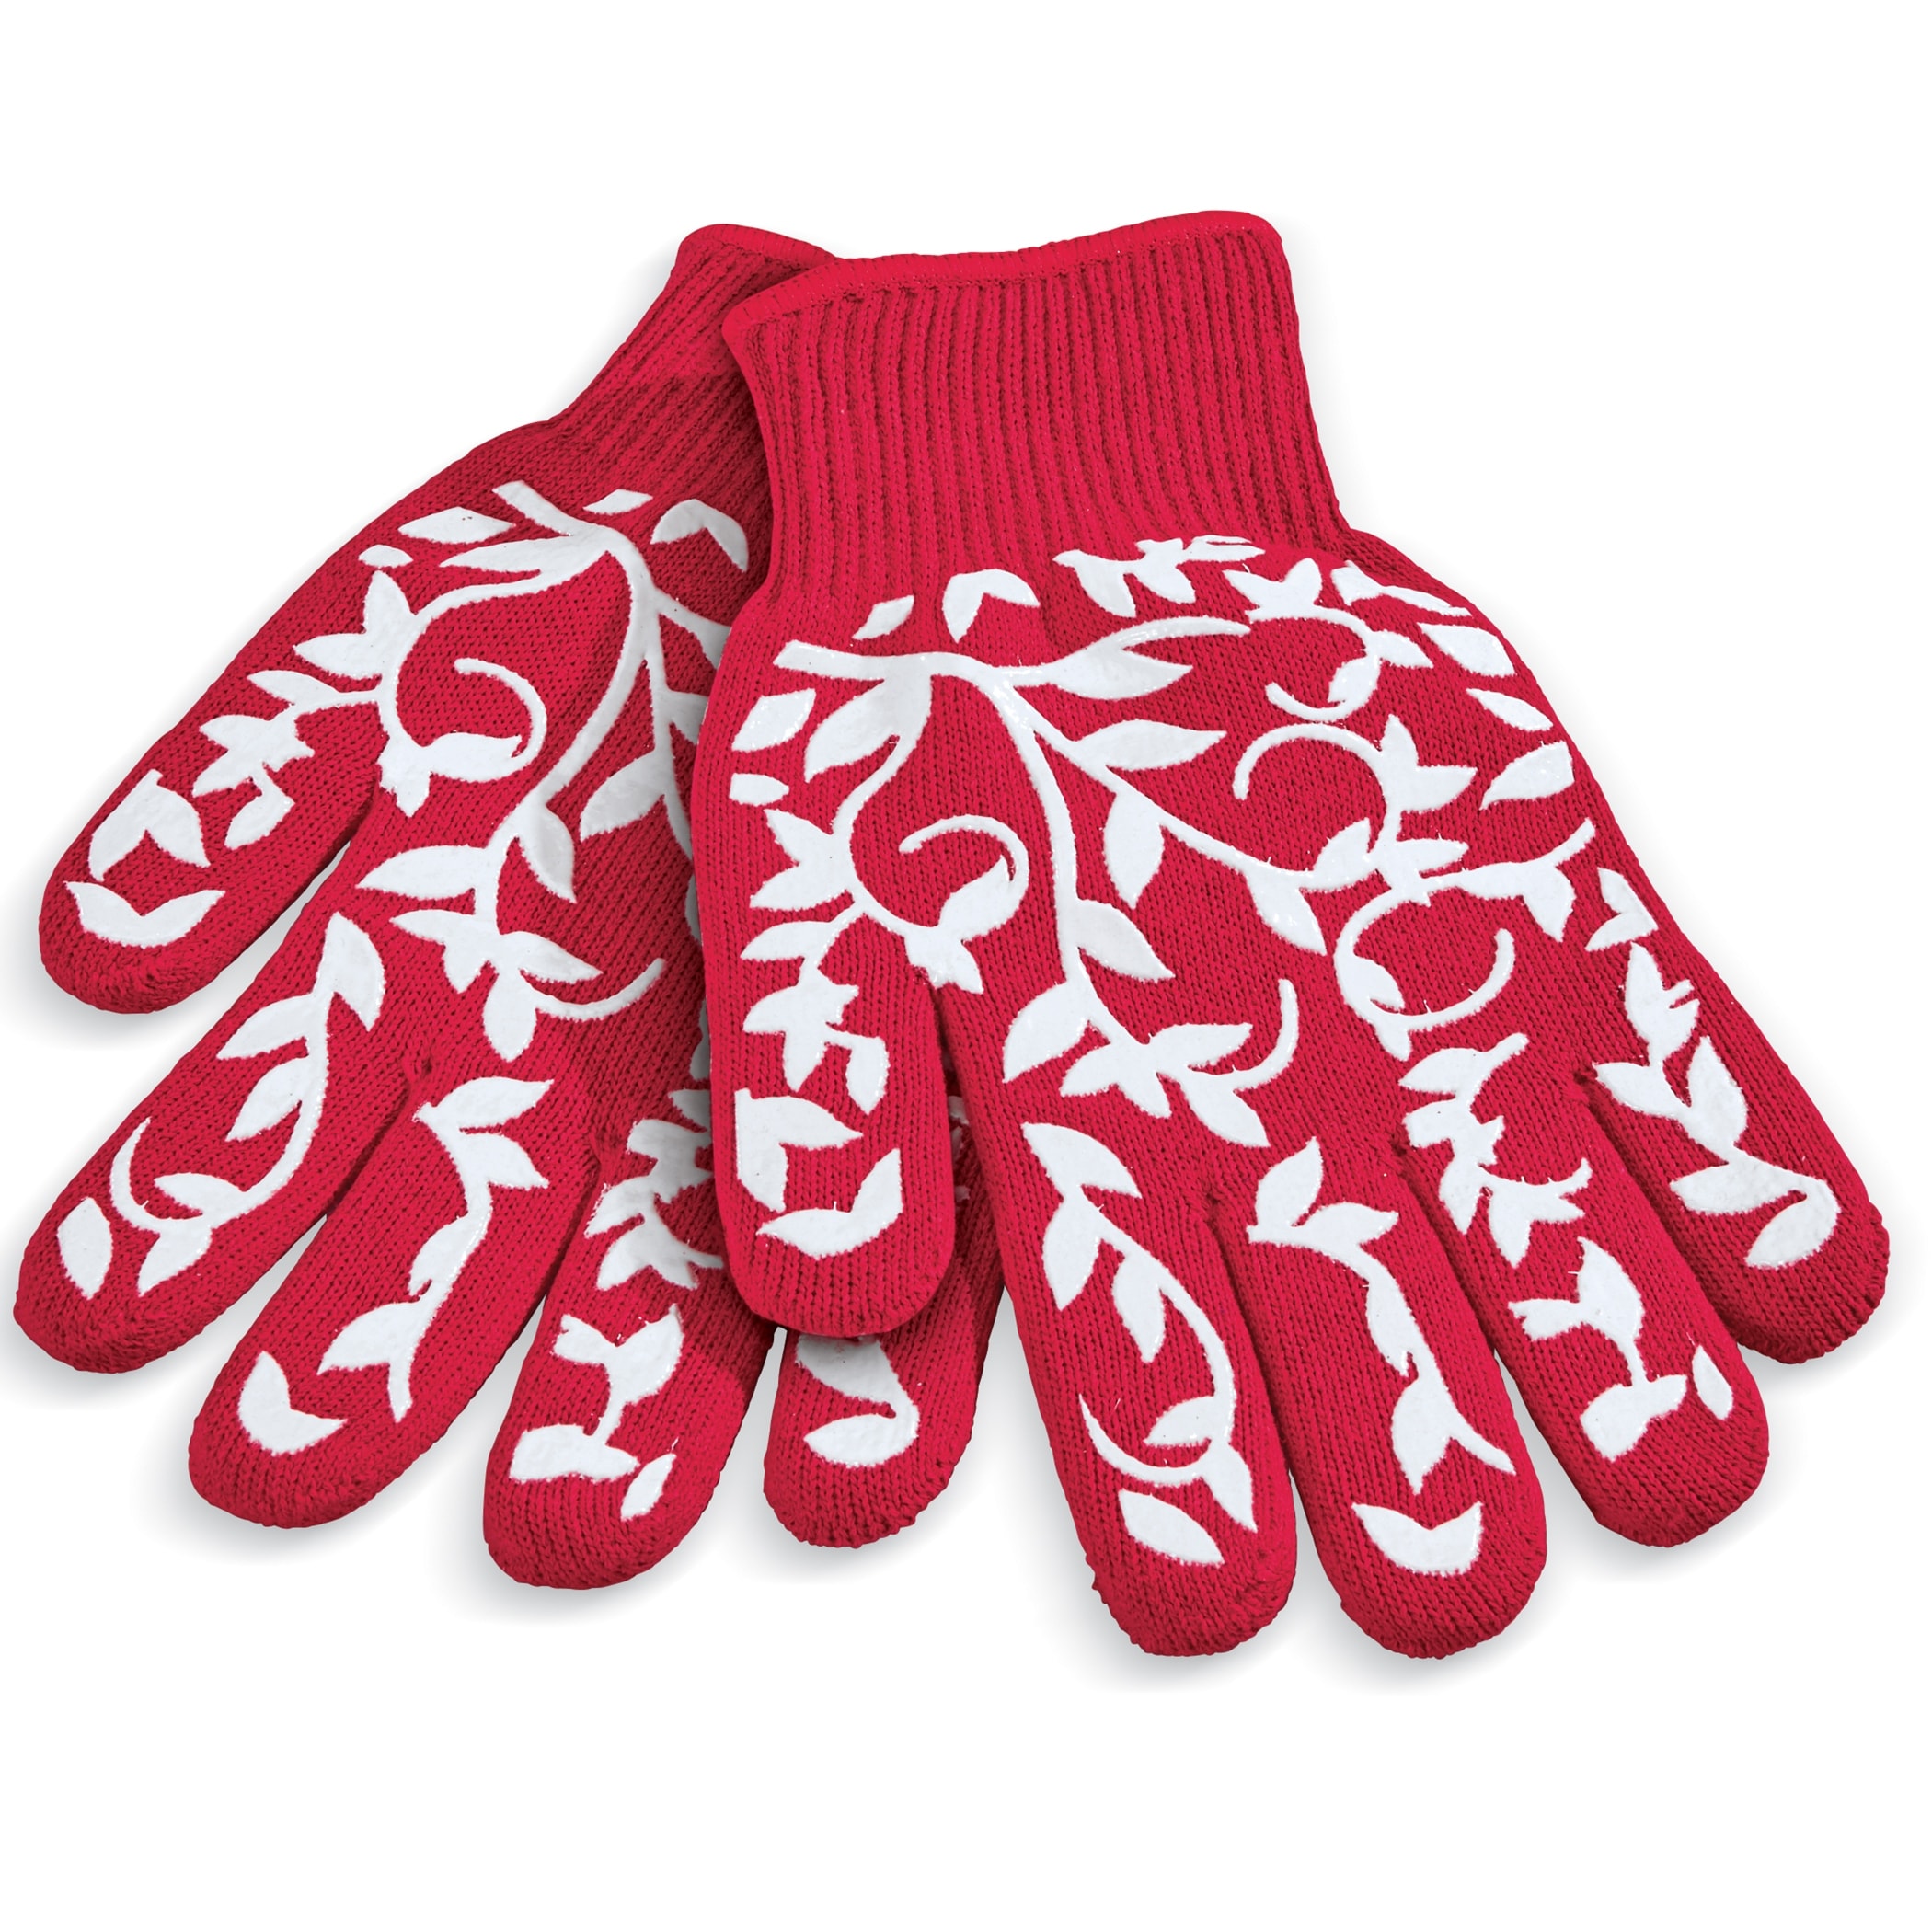 https://ak1.ostkcdn.com/images/products/is/images/direct/9fd0d9fc562a81b724b801ffef9bce49948af243/Heat-Resistant-Floral-Design-Polyester-Oven-Gloves---1-Pair.jpg